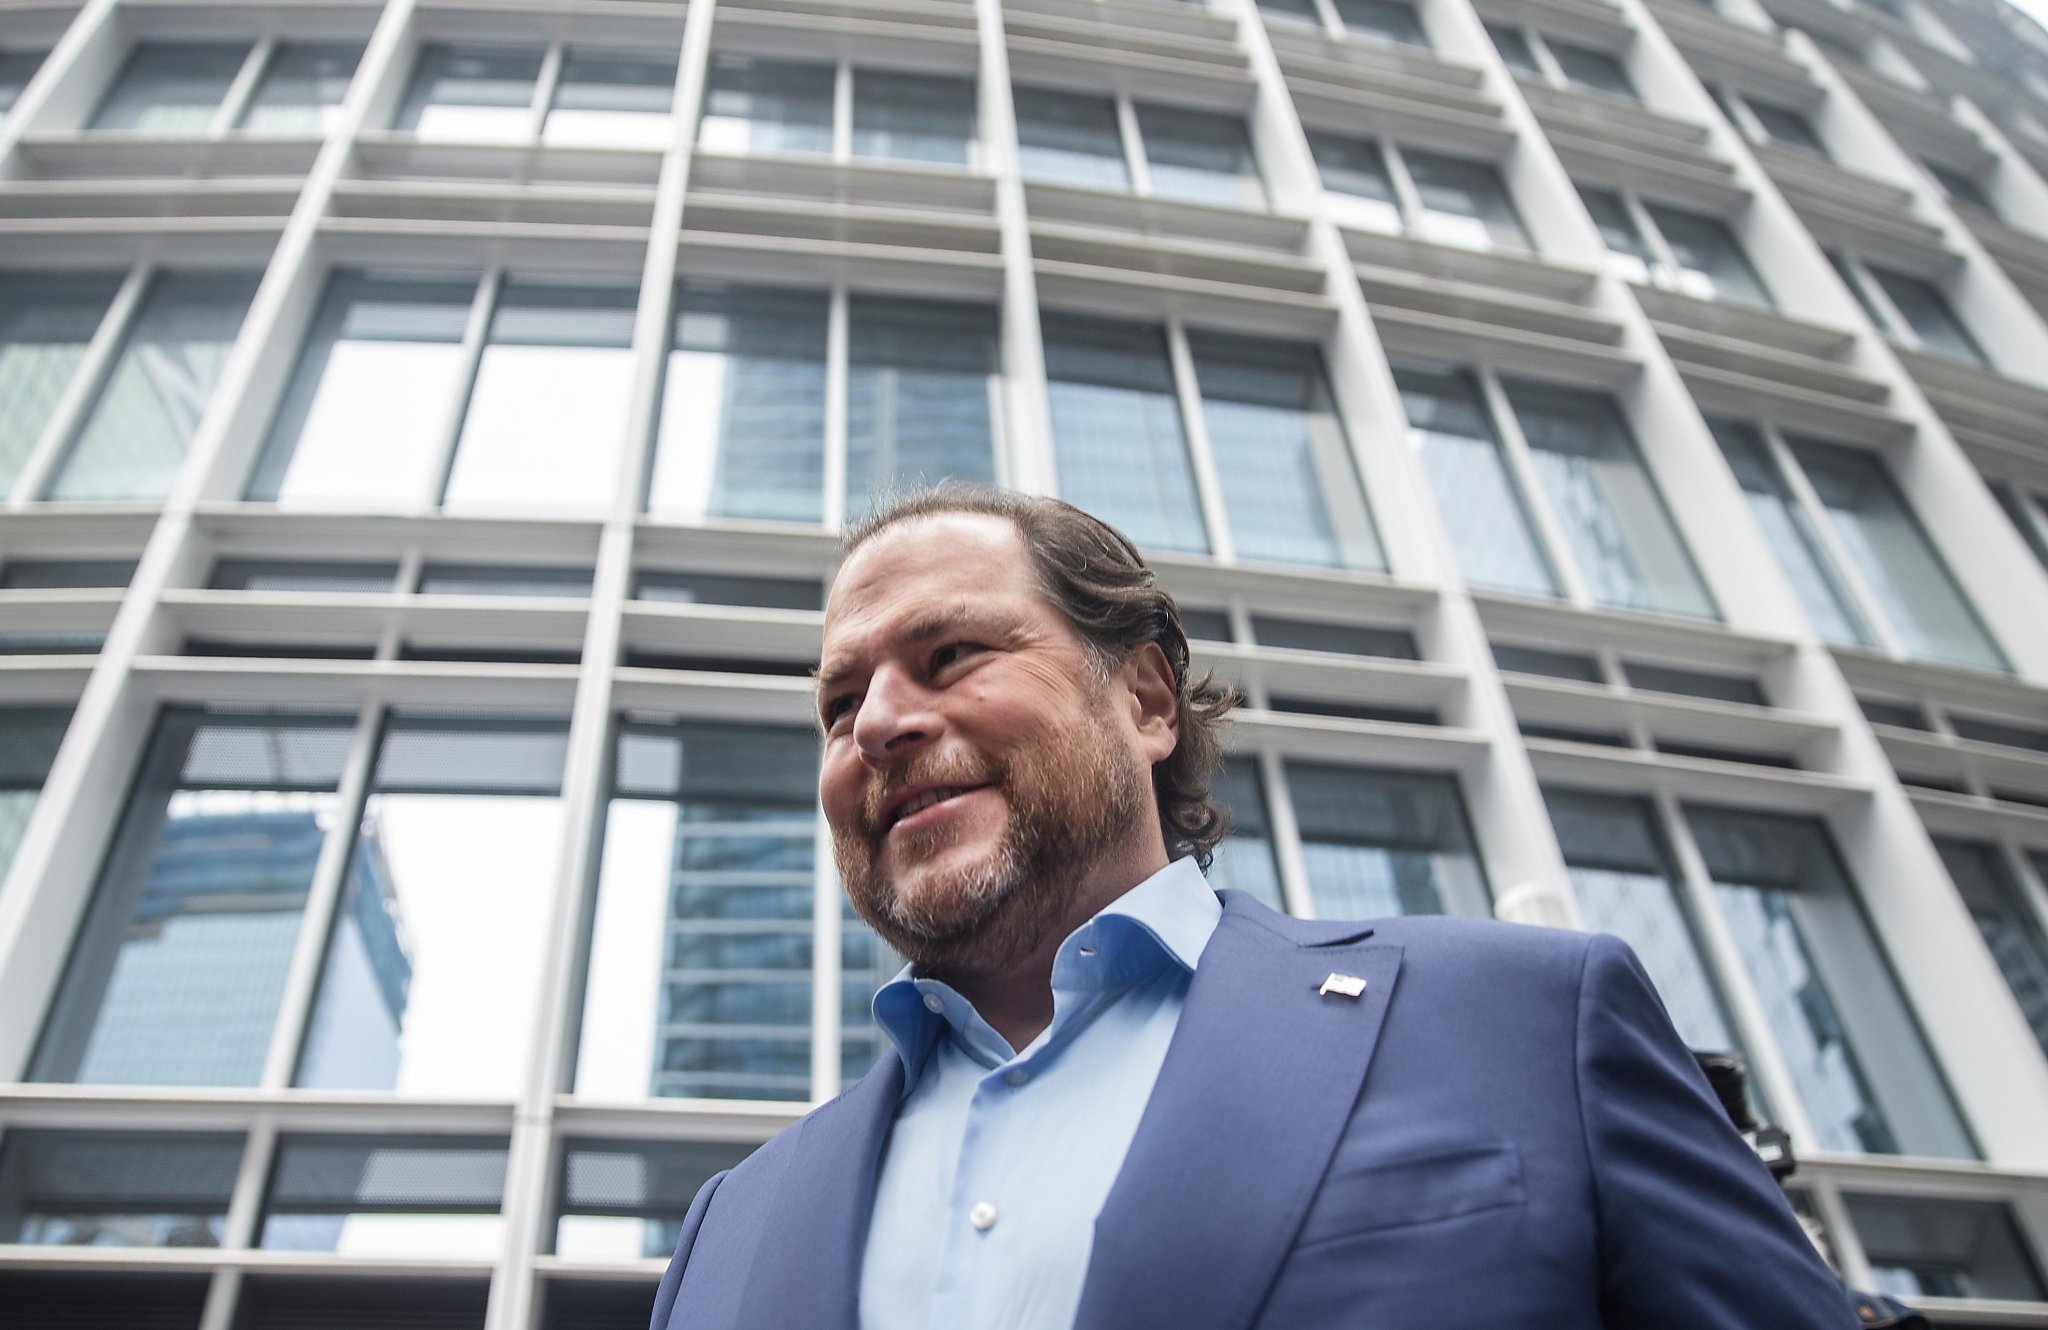 Salesforce did not pay federal income tax in 2020, despite $ 2.6 billion in profit